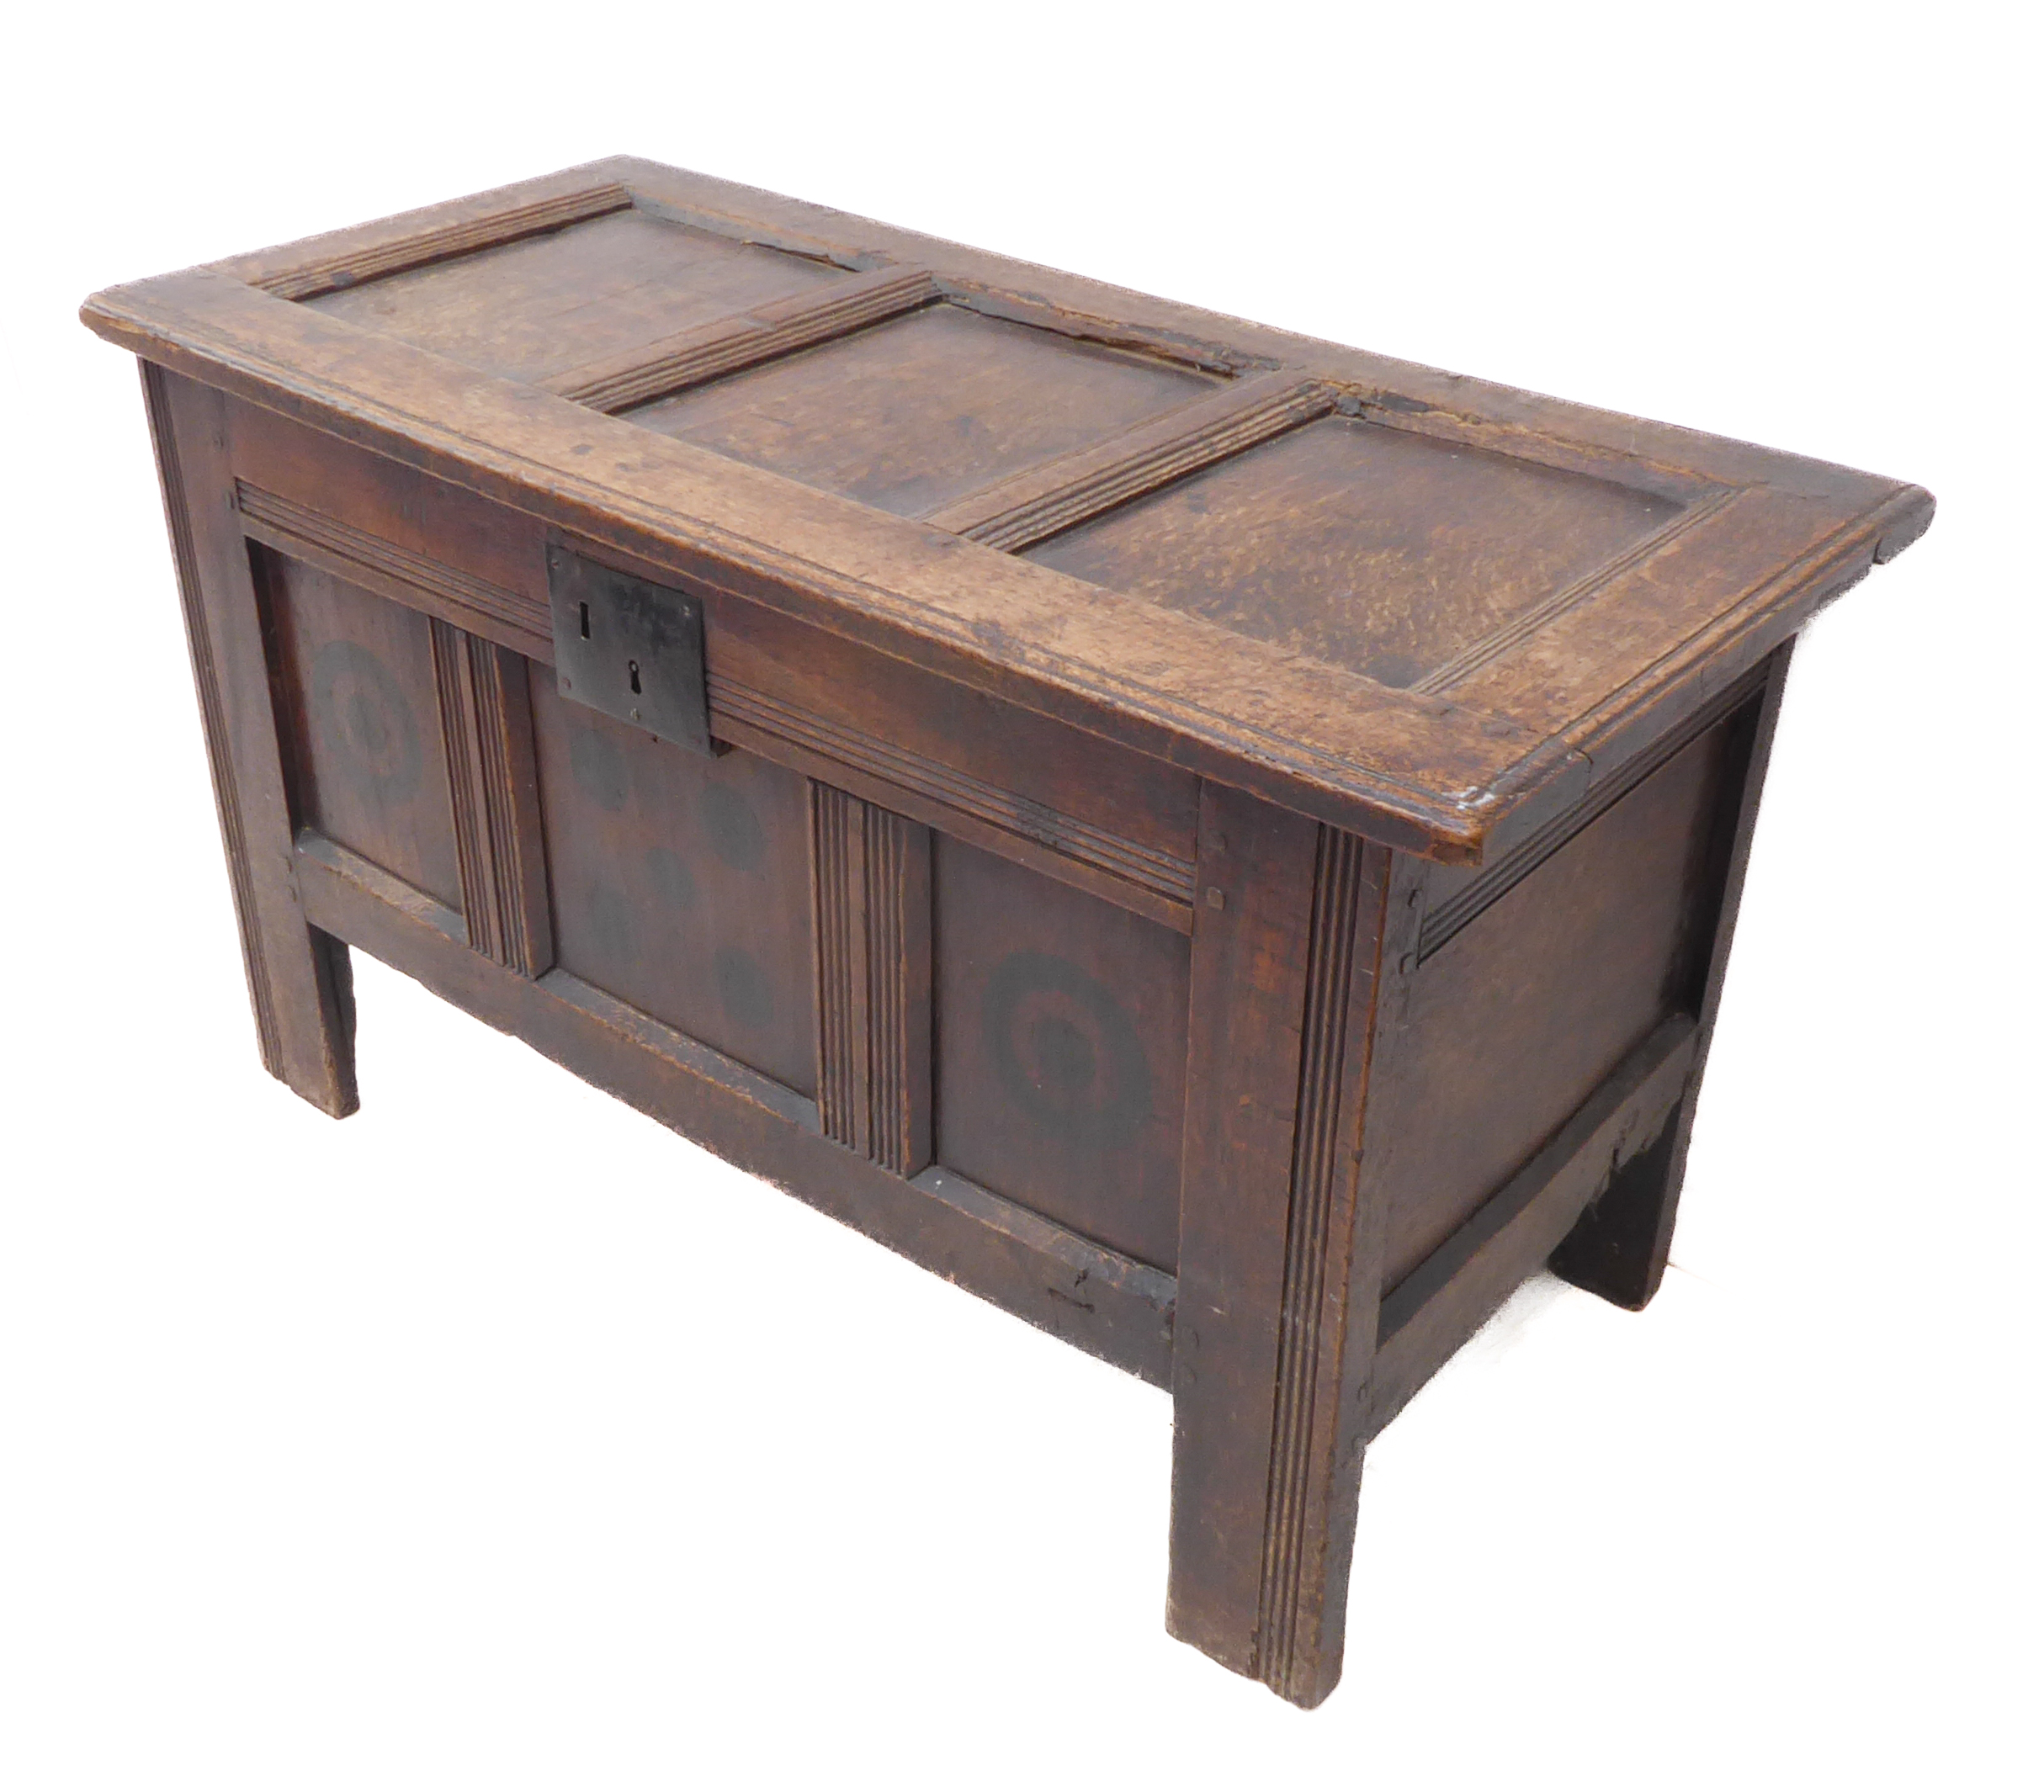 A late 17th / early 18th century oak chest of small proportions: the three-panel scratch moulded top